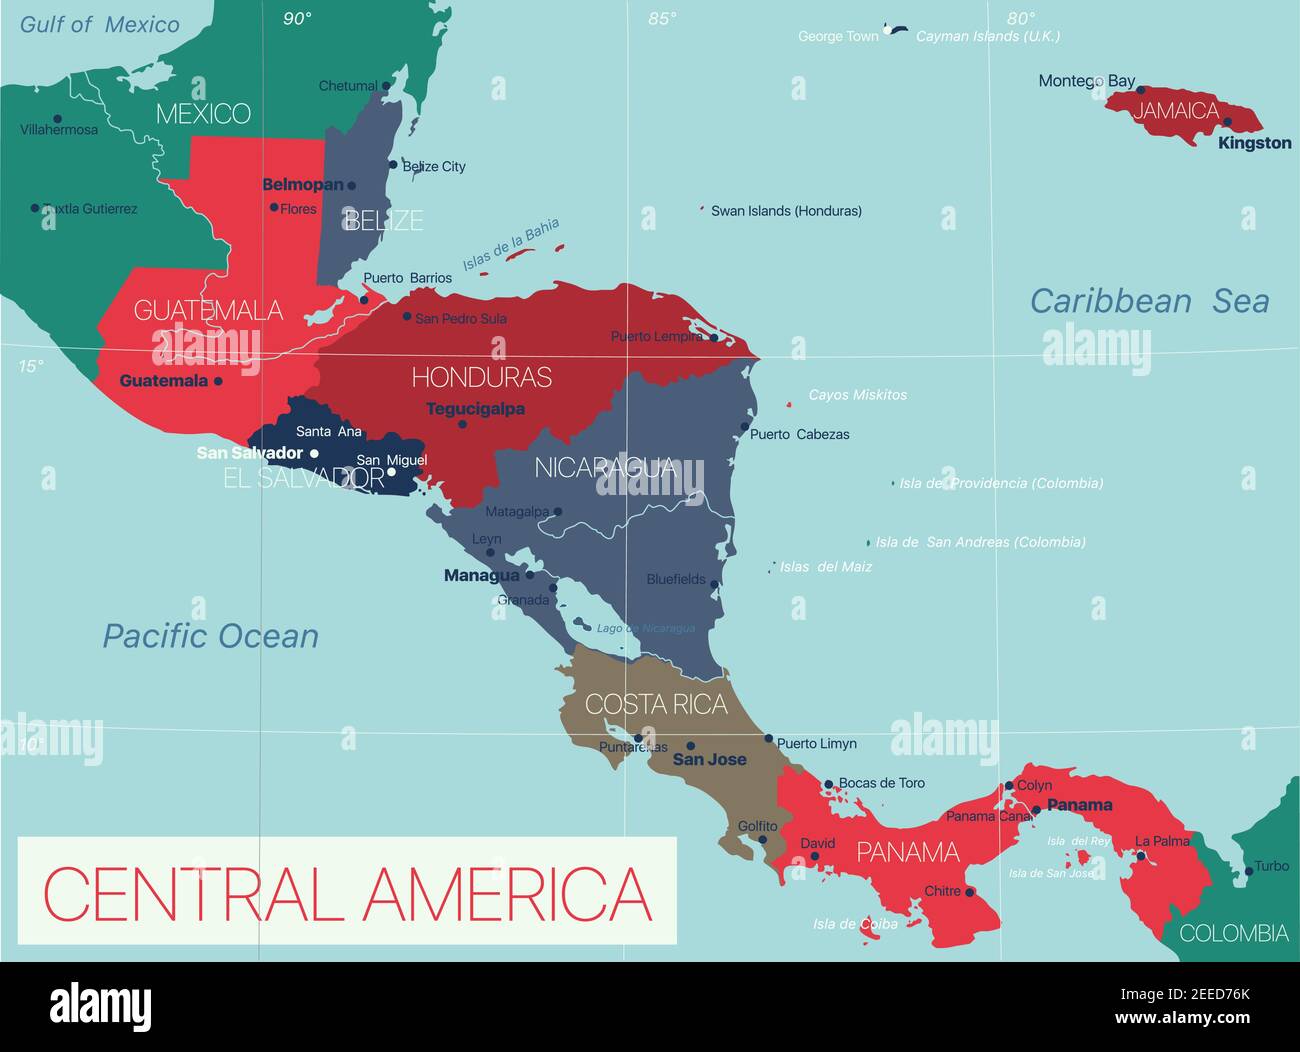 Central america map Stock Vector Images - Alamy